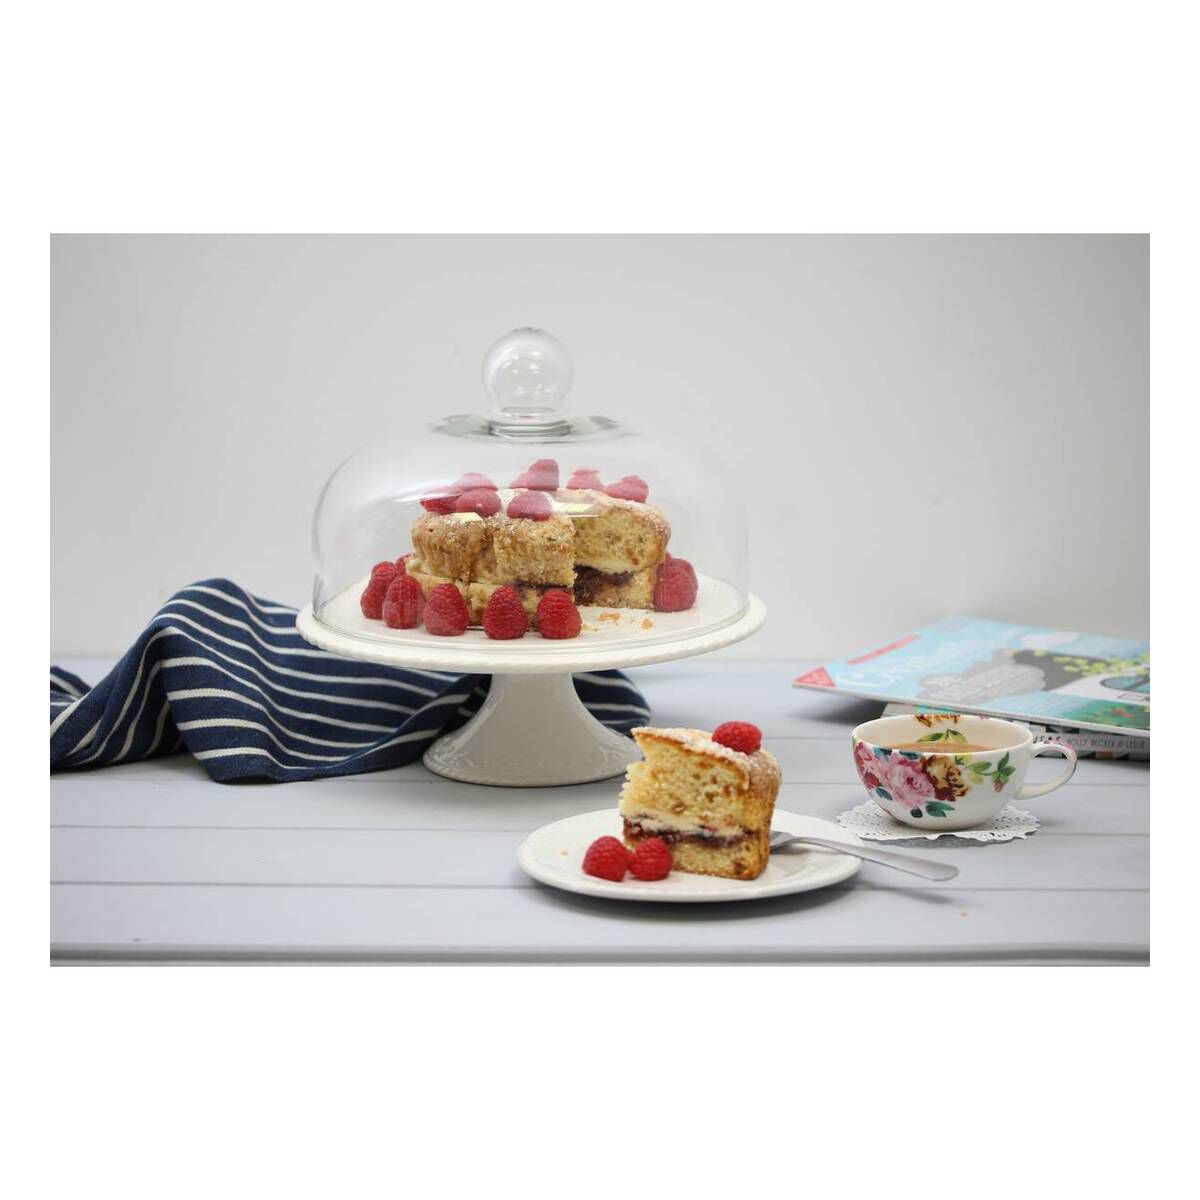 Ceramic Cake Stand and Glass Dome Lid 10 Inches | Hobbycraft